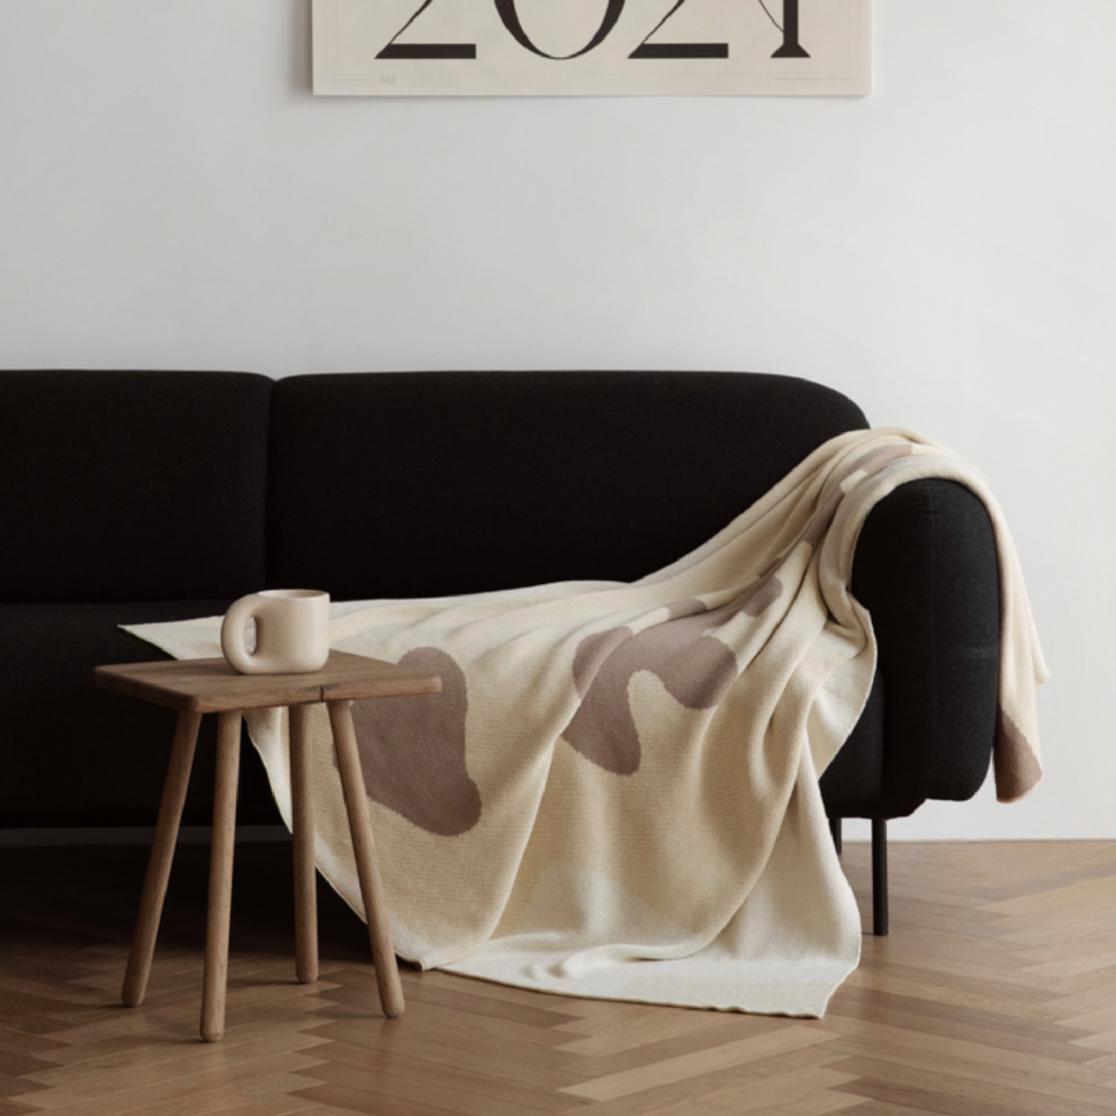 Soft textile blanket design and decor, by A Bit Sleepy homedecor concept store